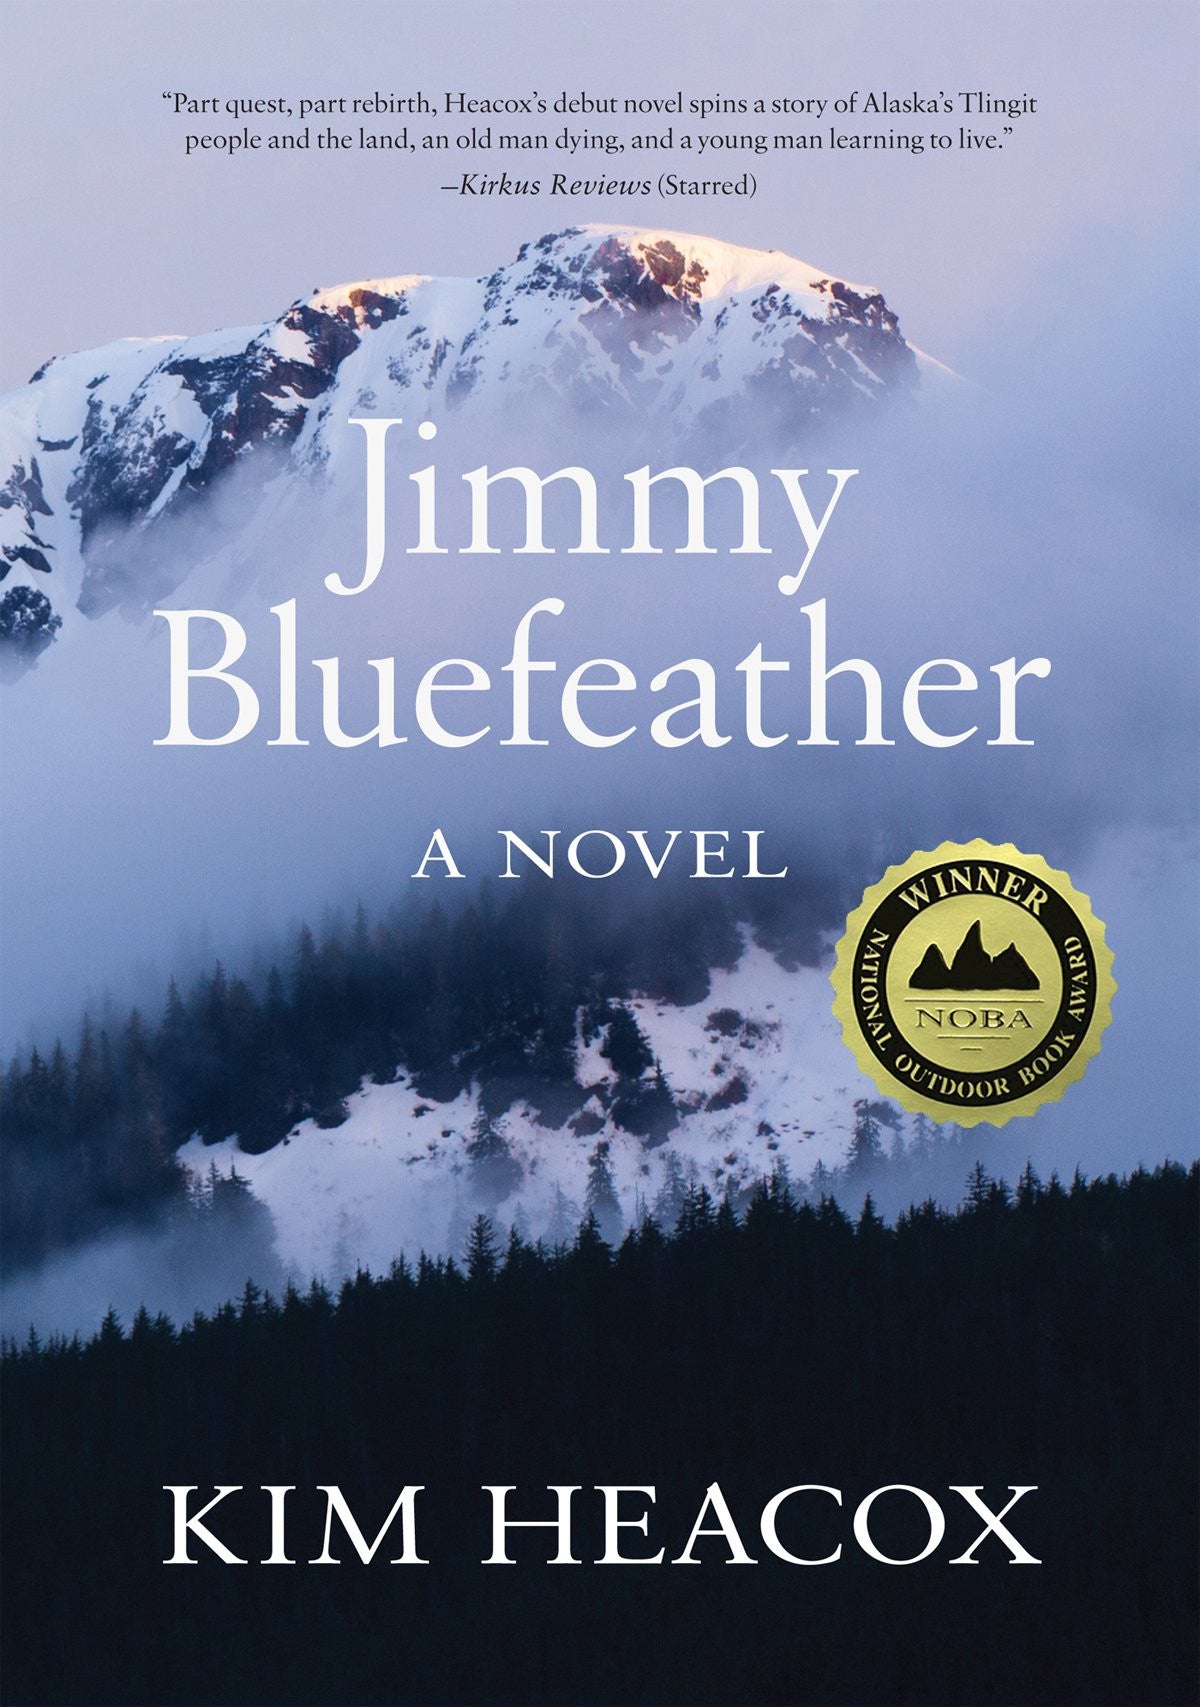 Jimmy Bluefeather by Kim Heacox - Softcover